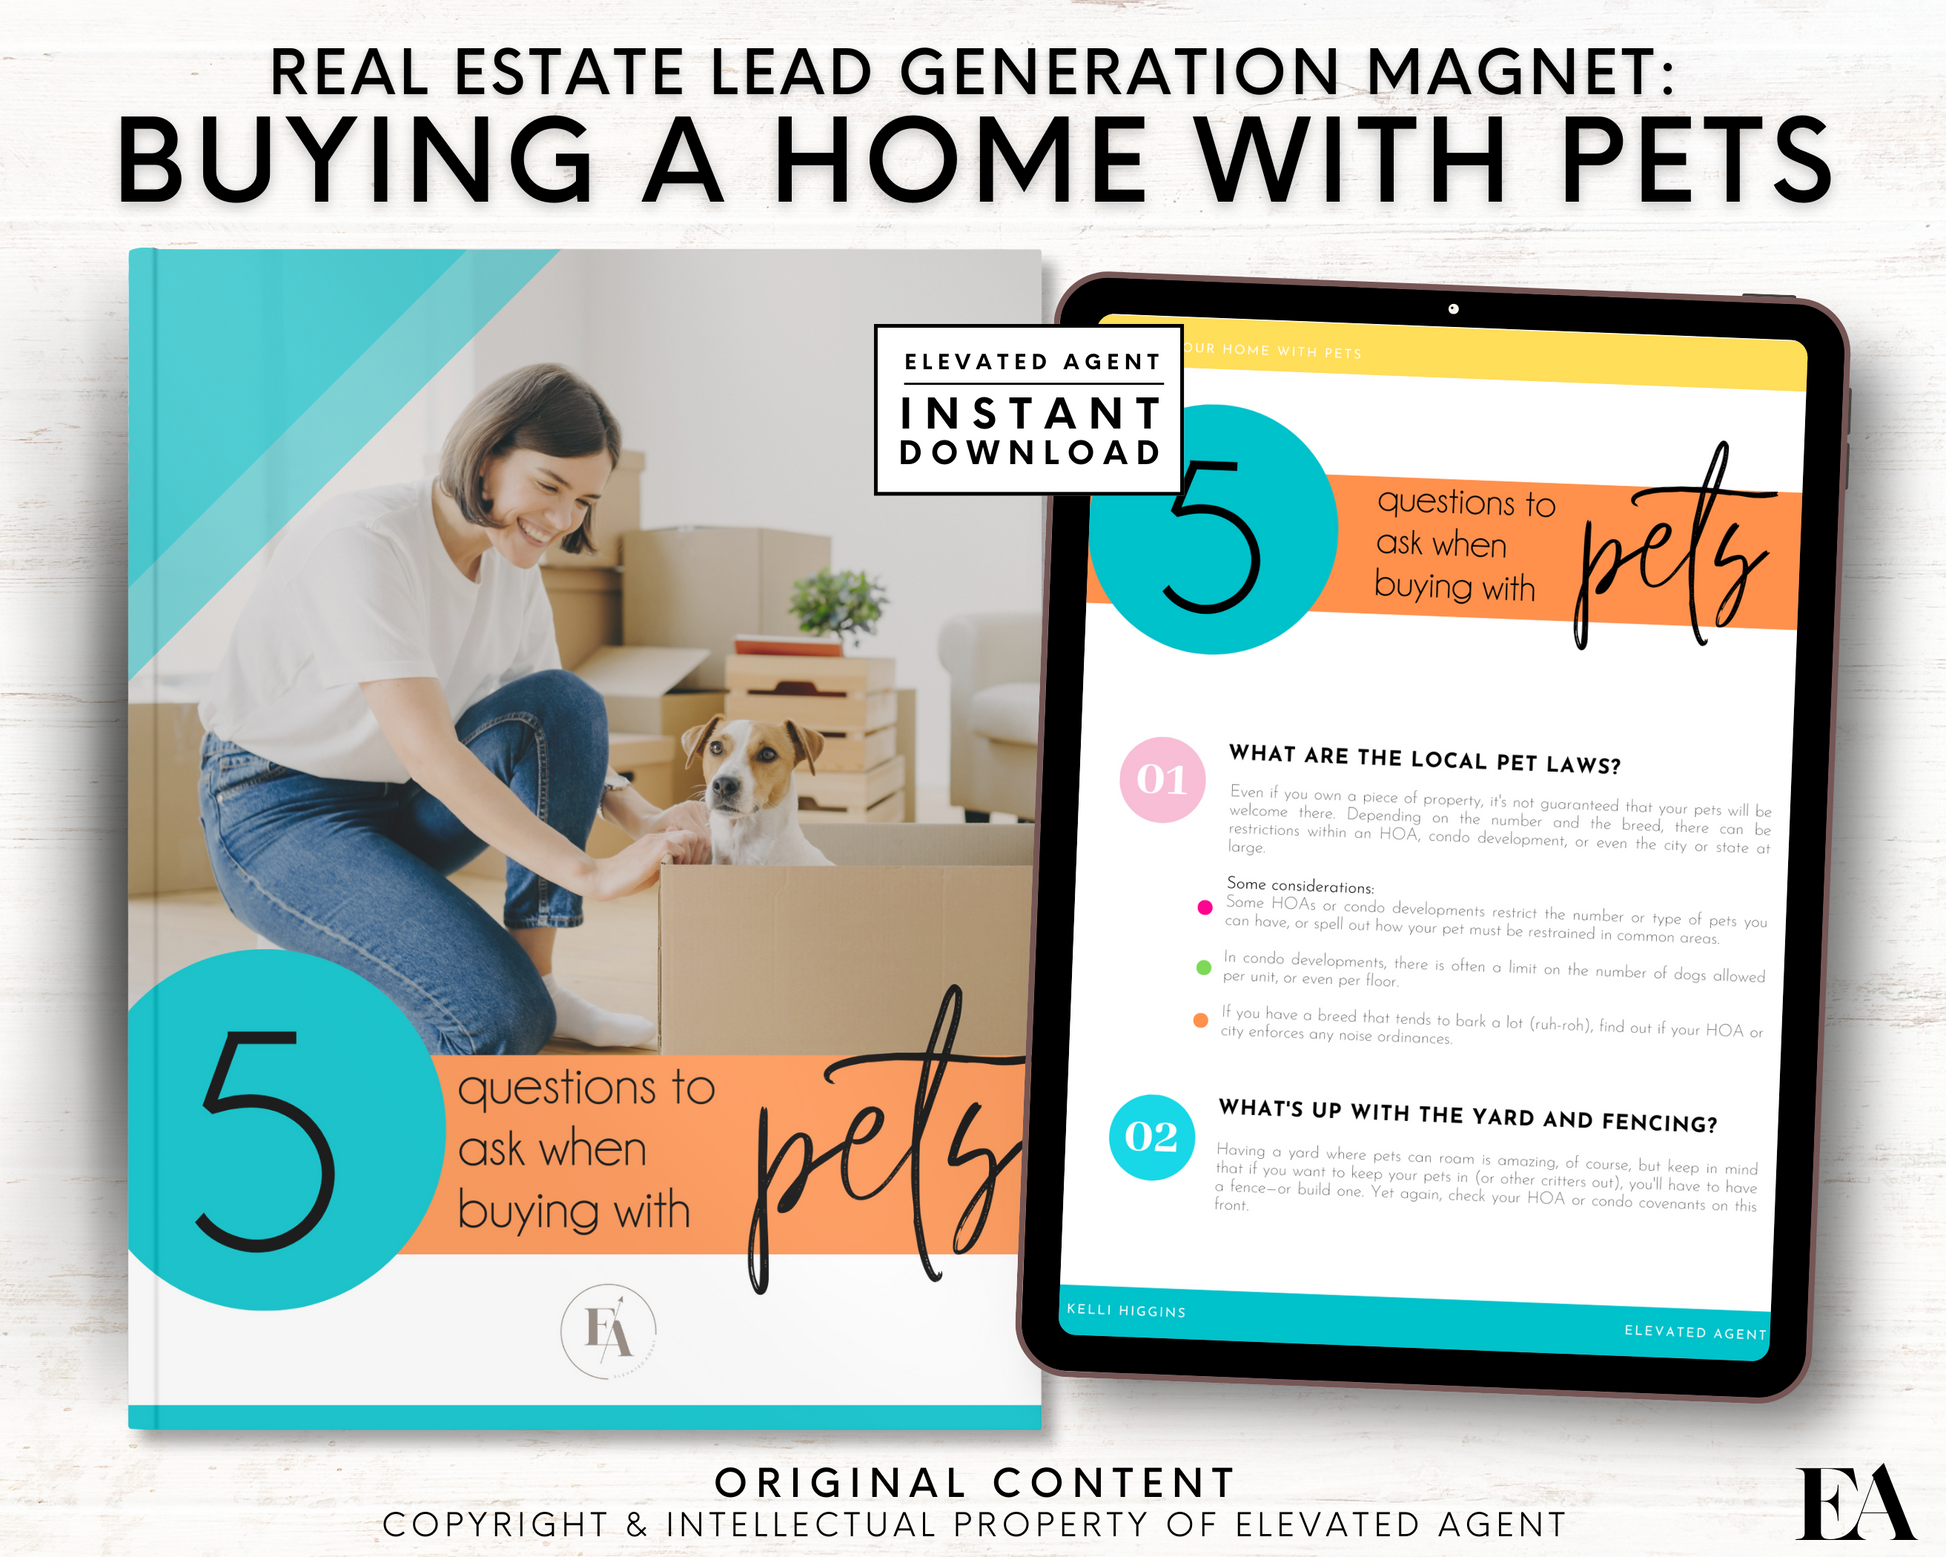 Home Buying Guide Buying a Home With Pets Home Buyer Presentation Realtor Marketing Realtor Packet Home Buyer Pet Buyer Guide Realtor Flyer